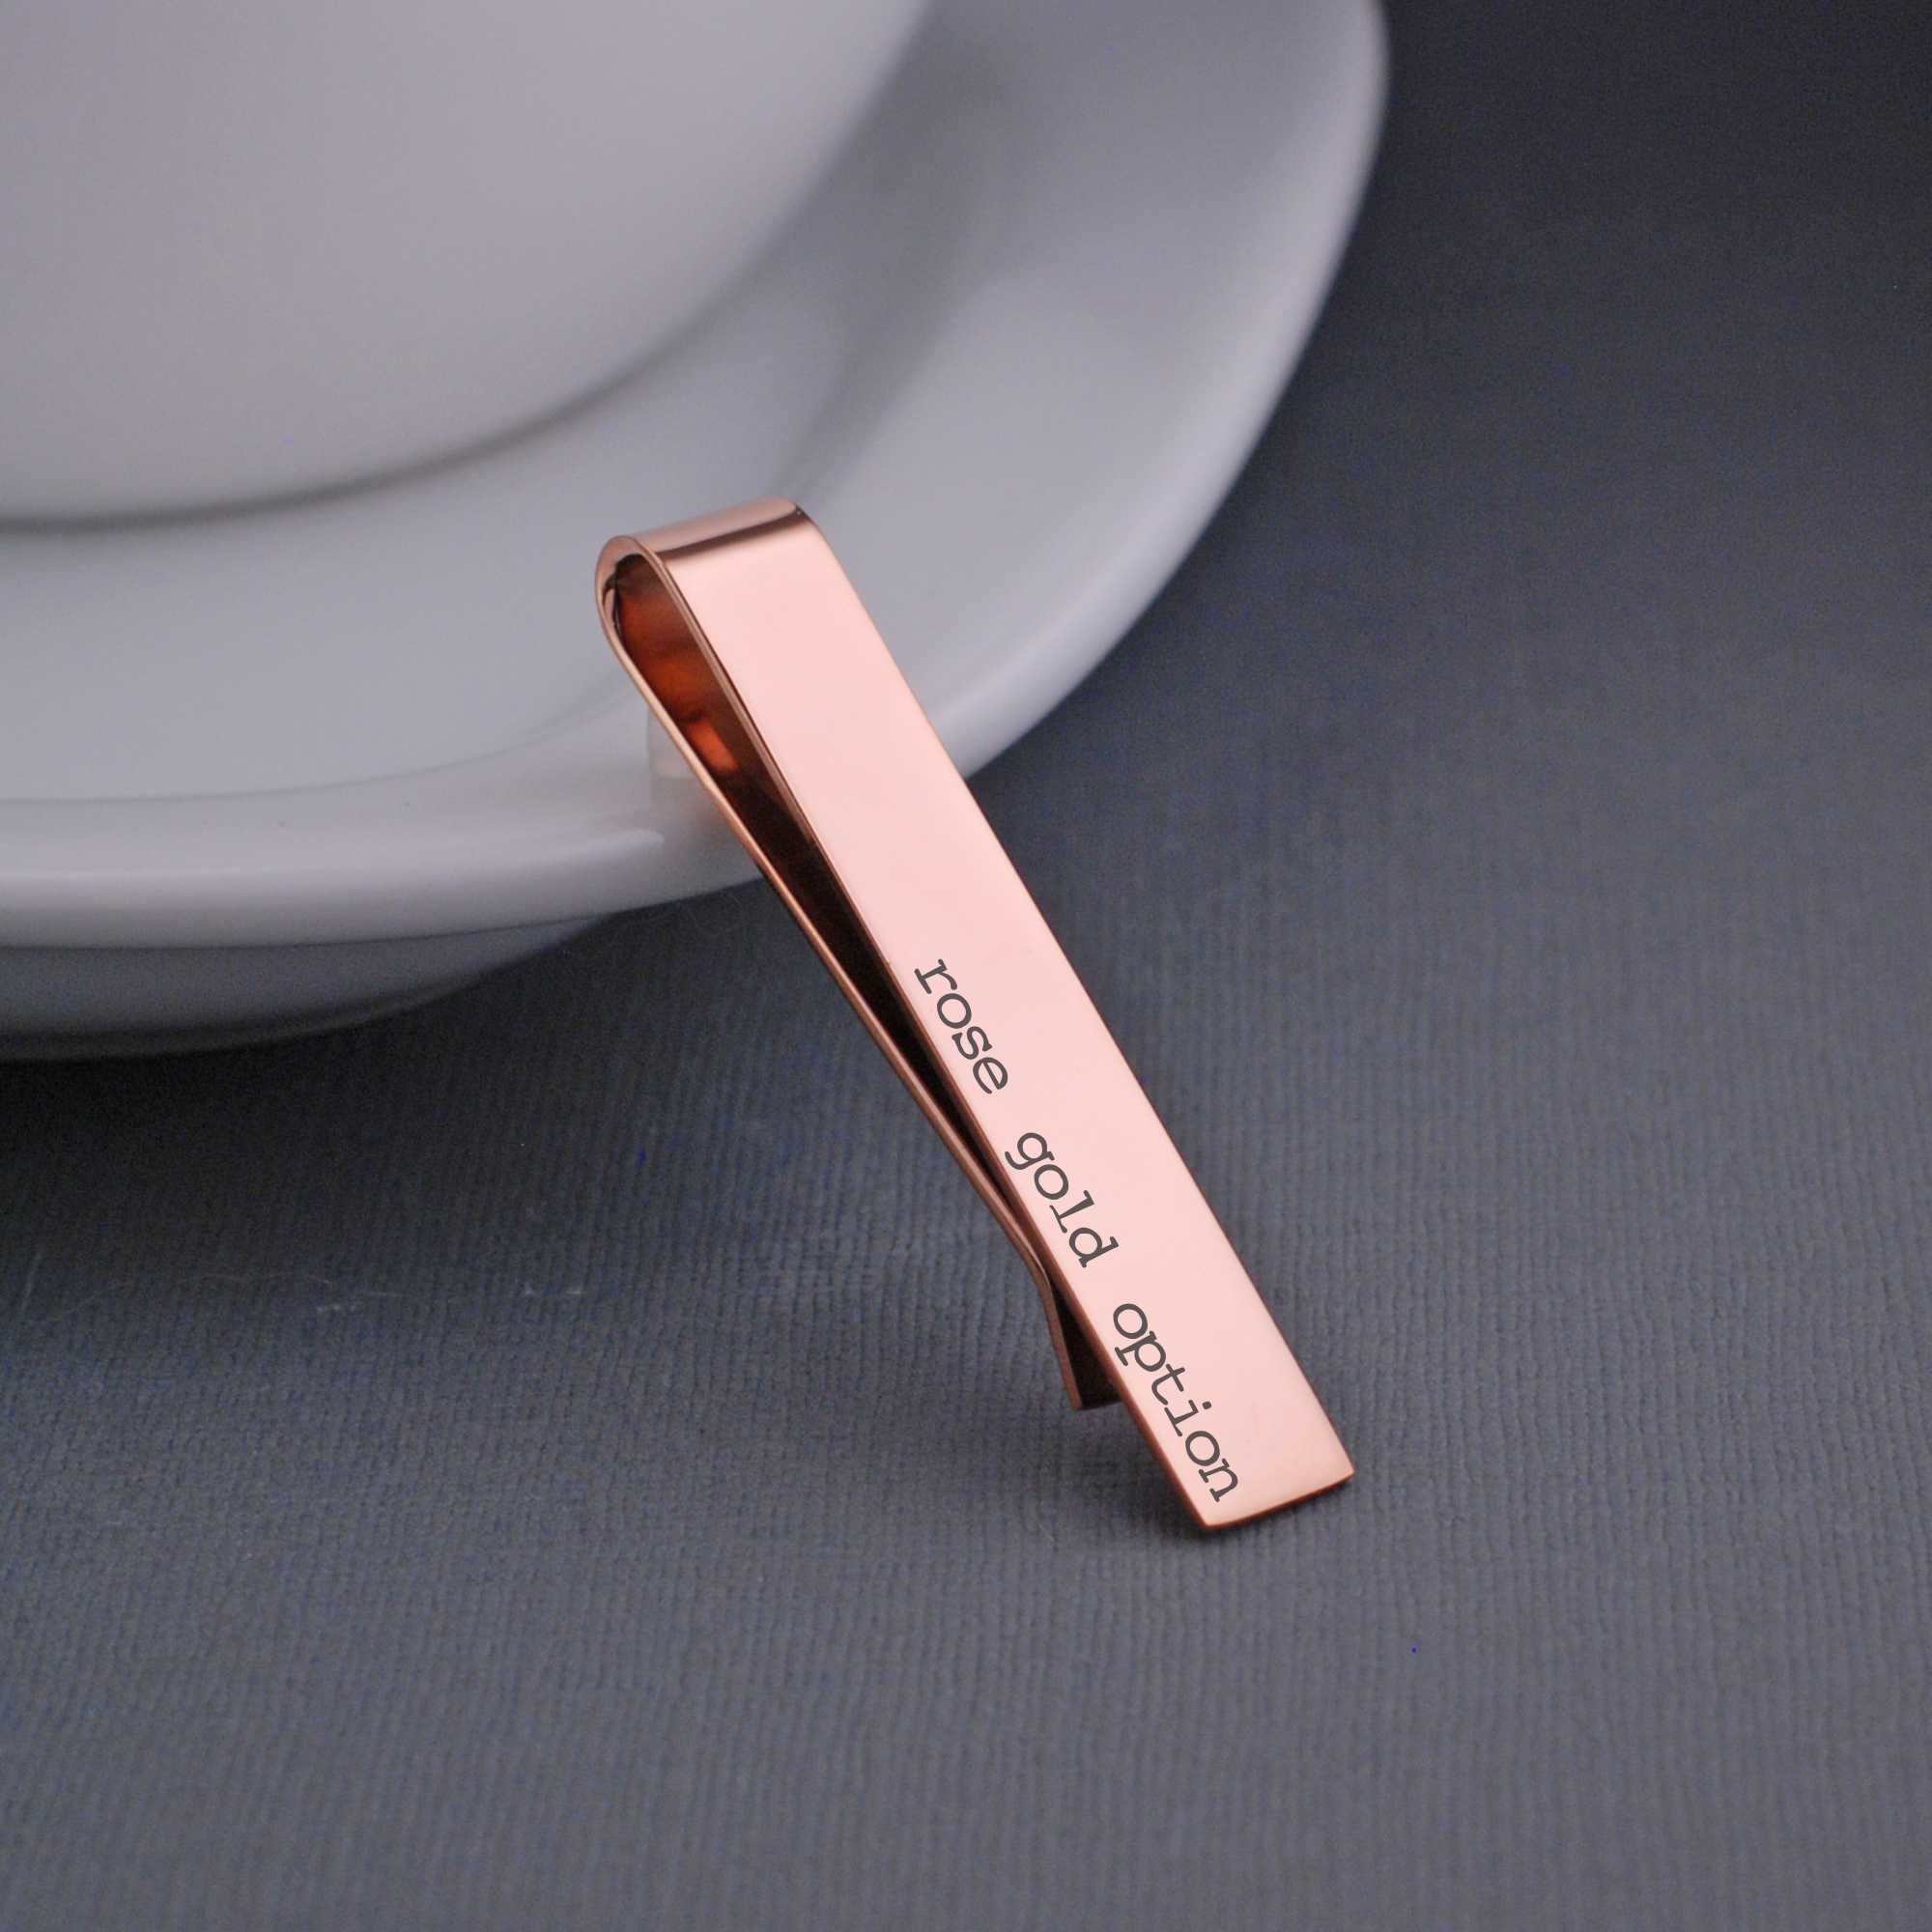 Off Roading, 4x4, Offroad, Personalized Tie Bar, Custom Tie Clip, Engraved Tie Bar, Father of The Bride, Tie Clip Personalize